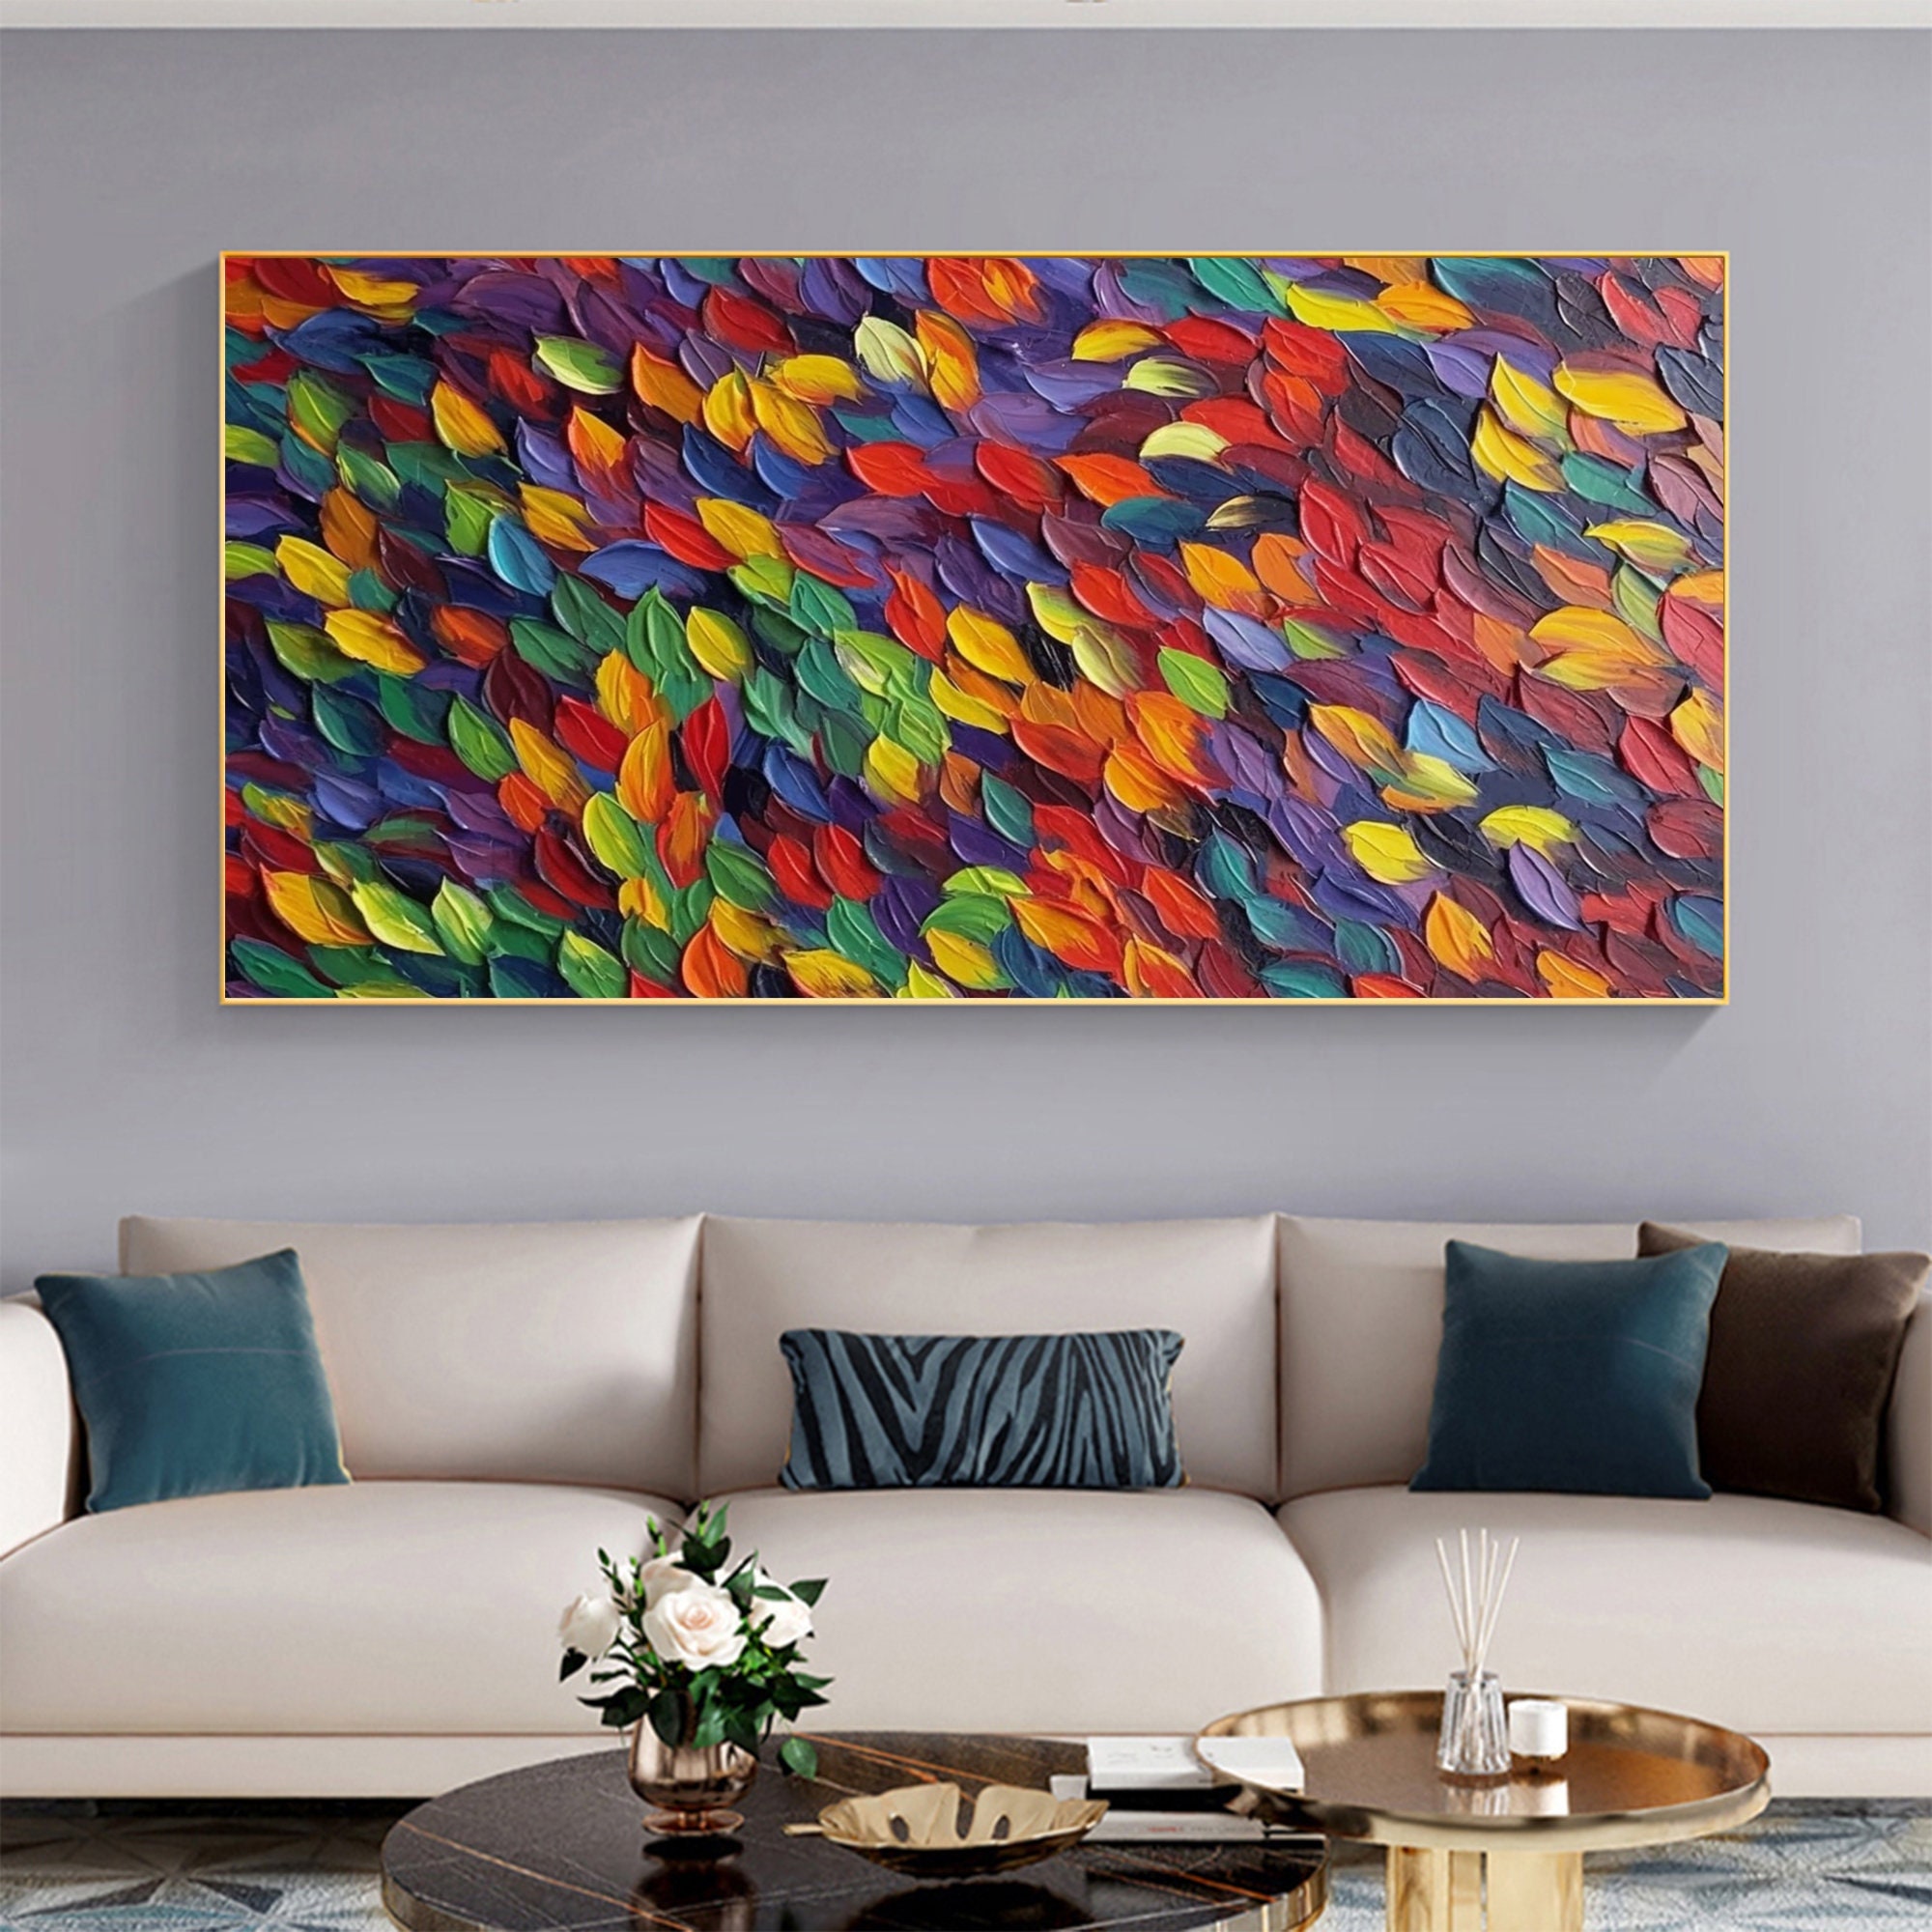 Oil Canvas Painting, Feathers Art, Etsy Painting Original Abstract - Large Colorful Canvas, Wall Room Colorful Painting,living Decor on Custom Wall